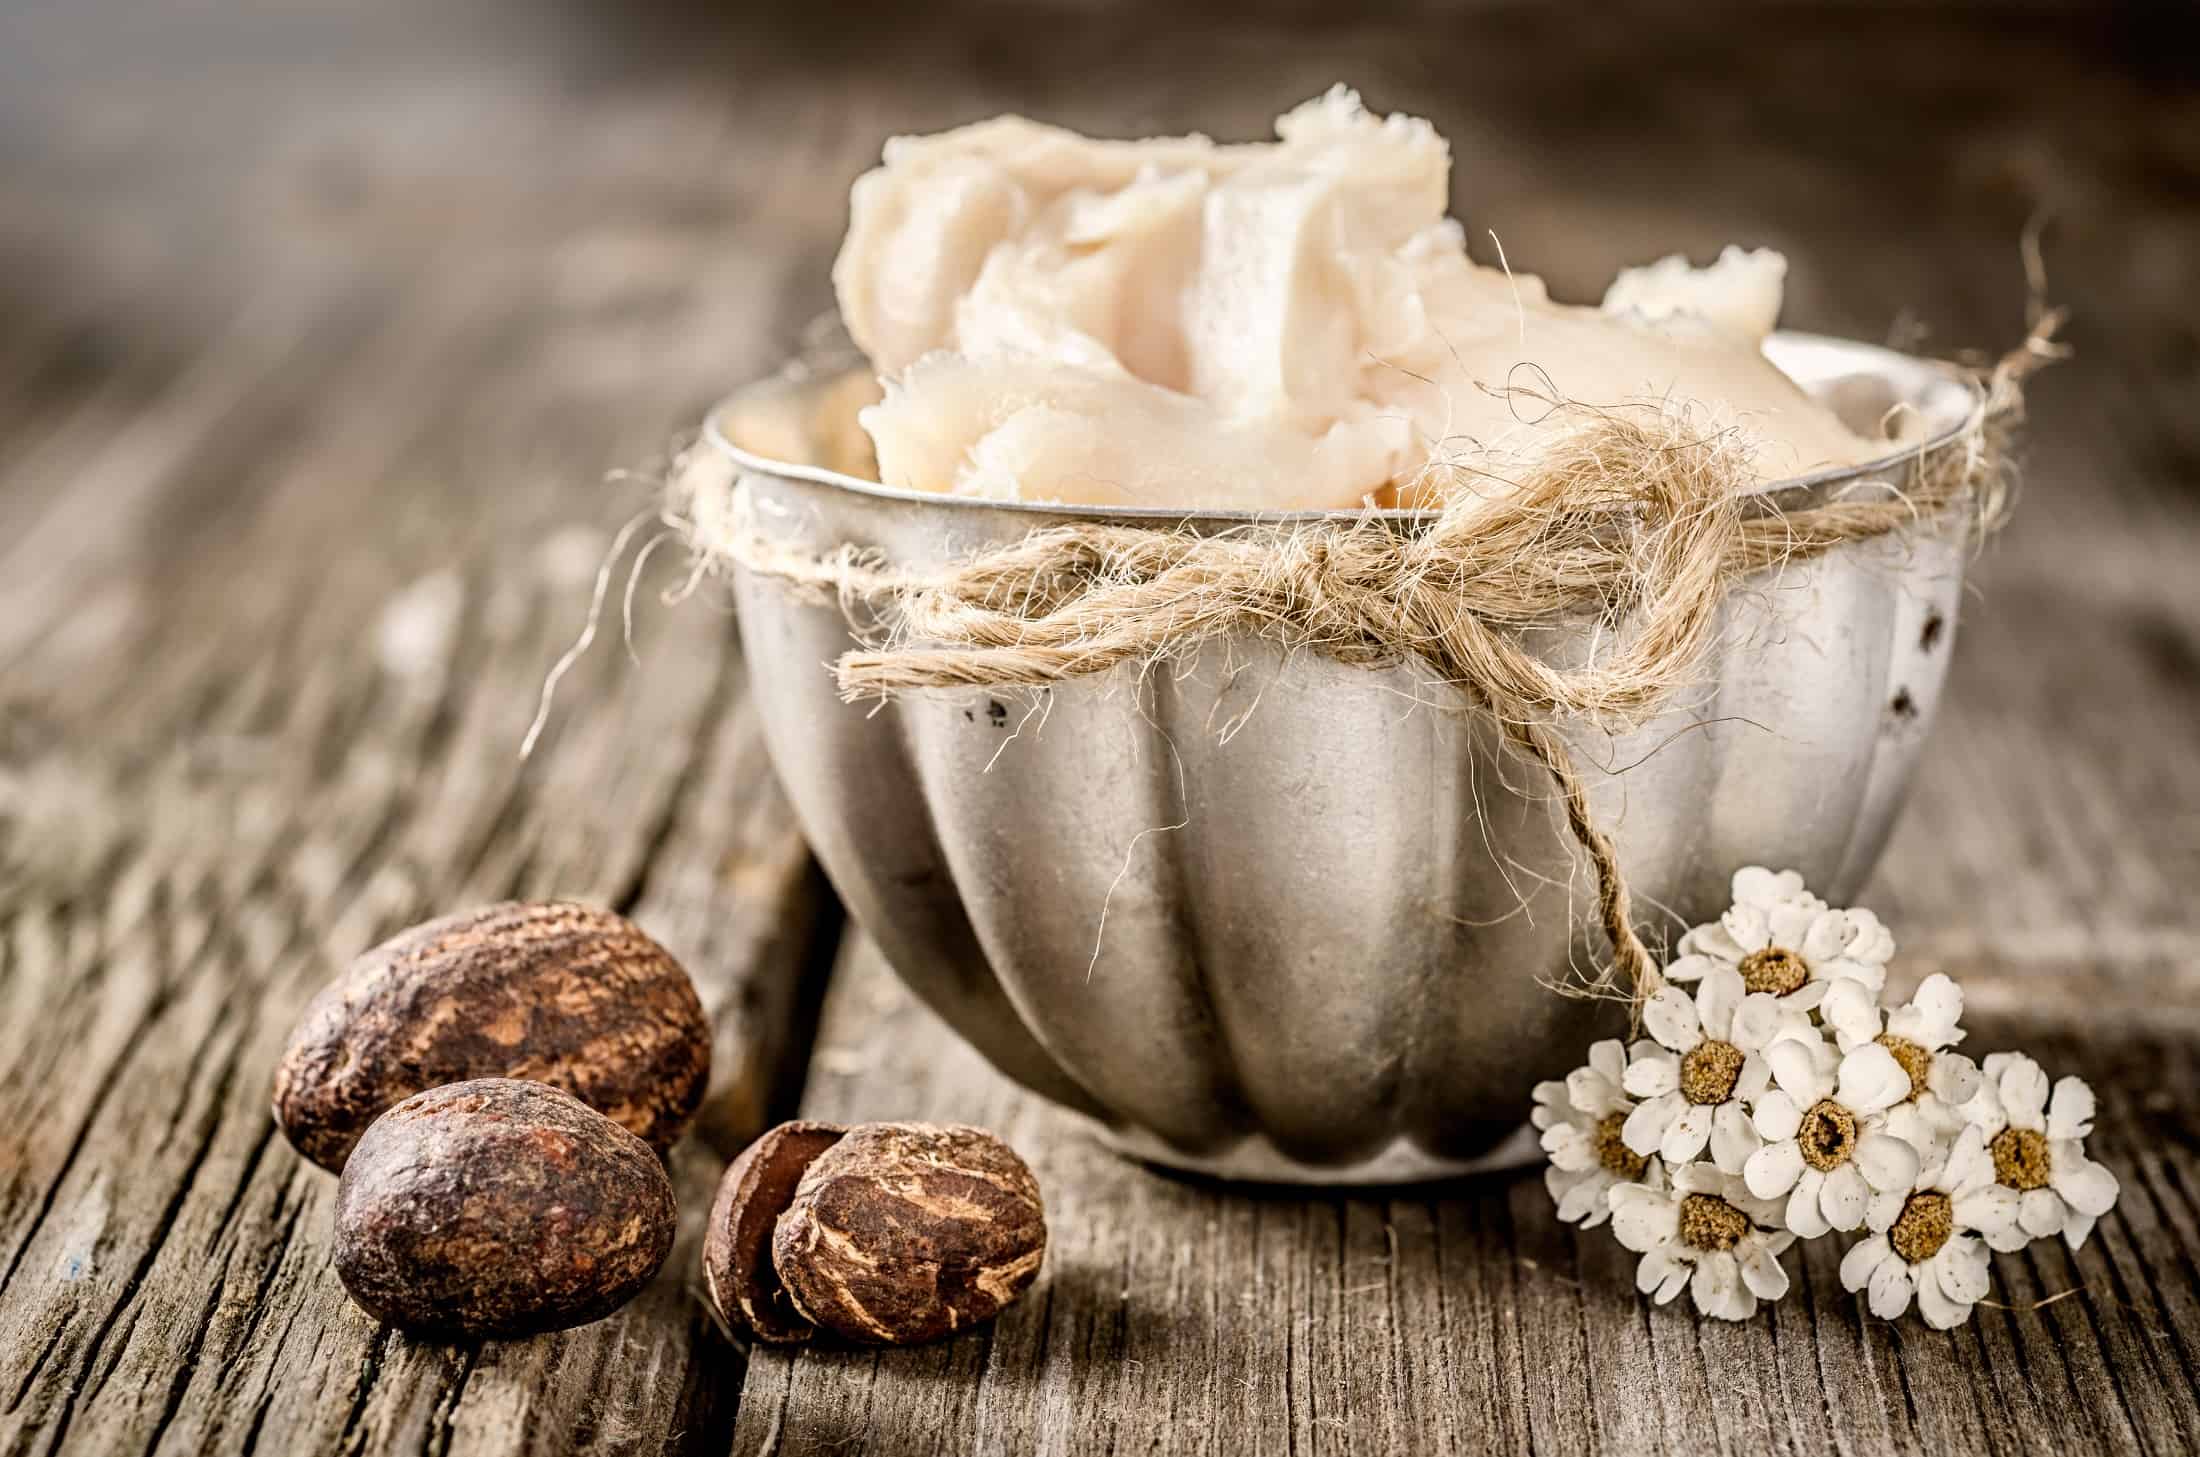 How does shea butter affect skin and hair?